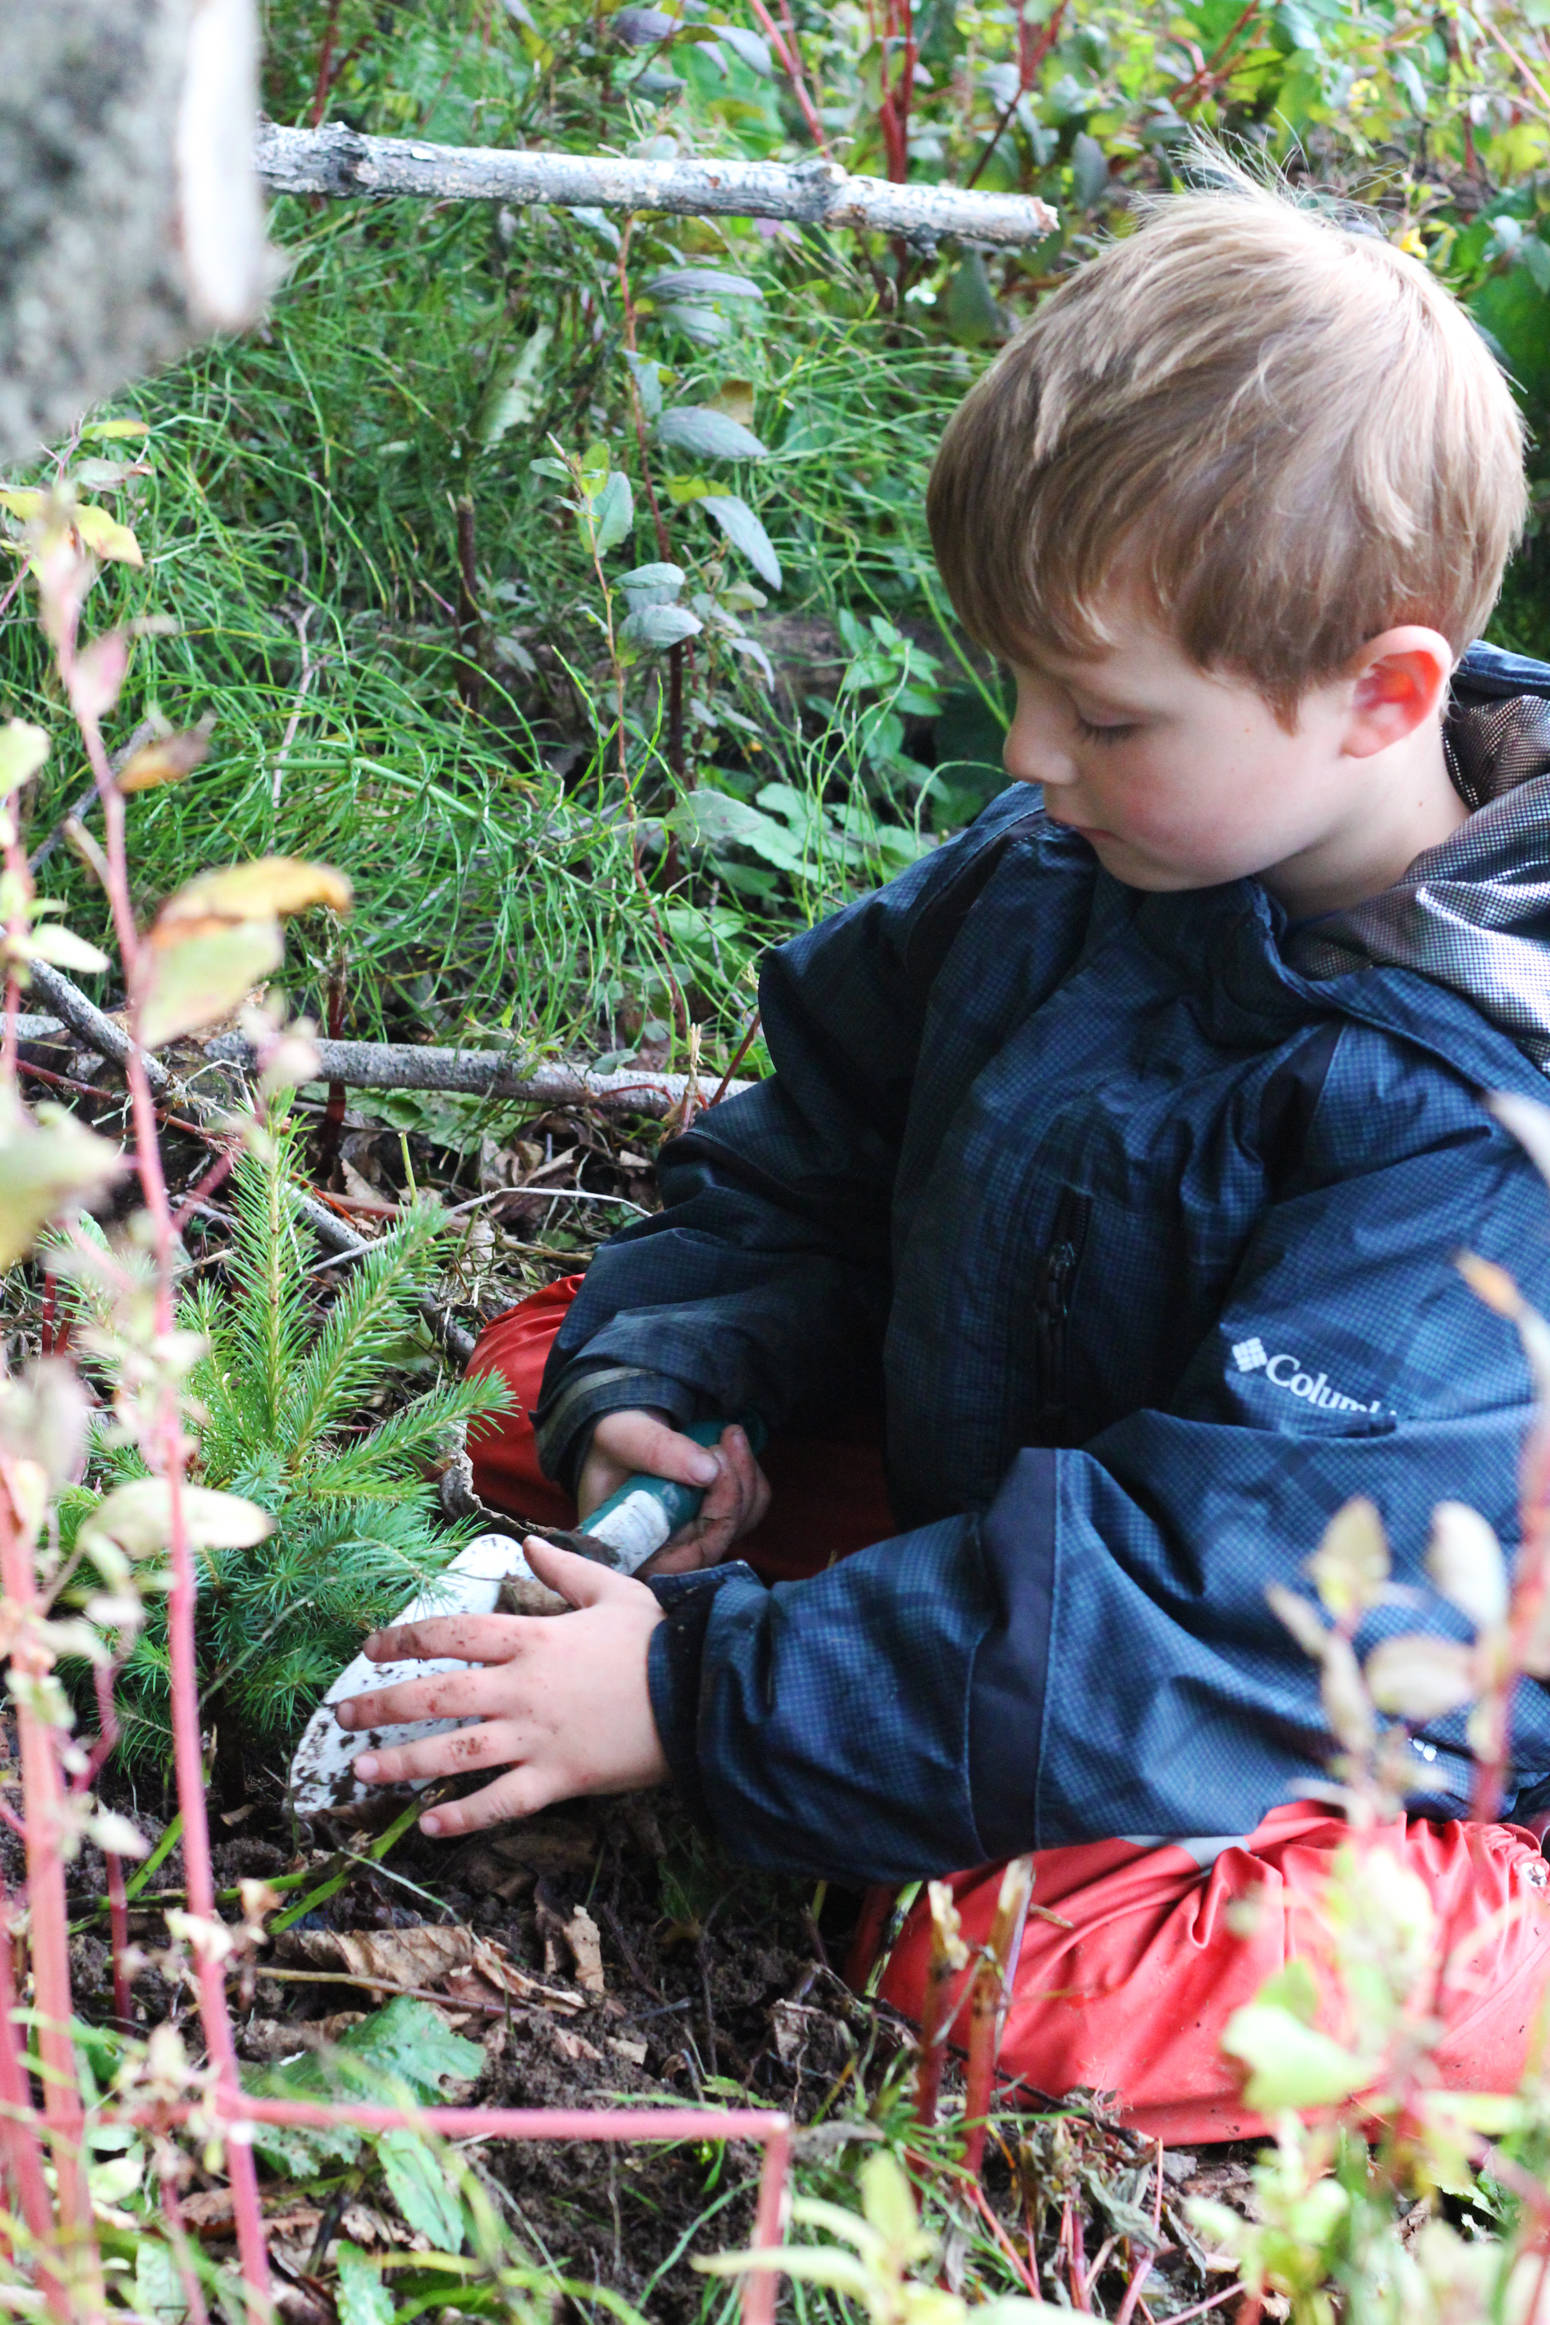 Sawyer Johnson, a student at Paul Banks Elementary, plants a tree in the dirt along a recently-completed trail Thursday, Sept. 7, 2017 at Karen Hornaday Park in Homer, Alaska. Johnson and his classmates volunteered to transplant frees from a nearby street to the trail to help improve diversity among plants at the park. (Photo by Megan Pacer/Homer News)